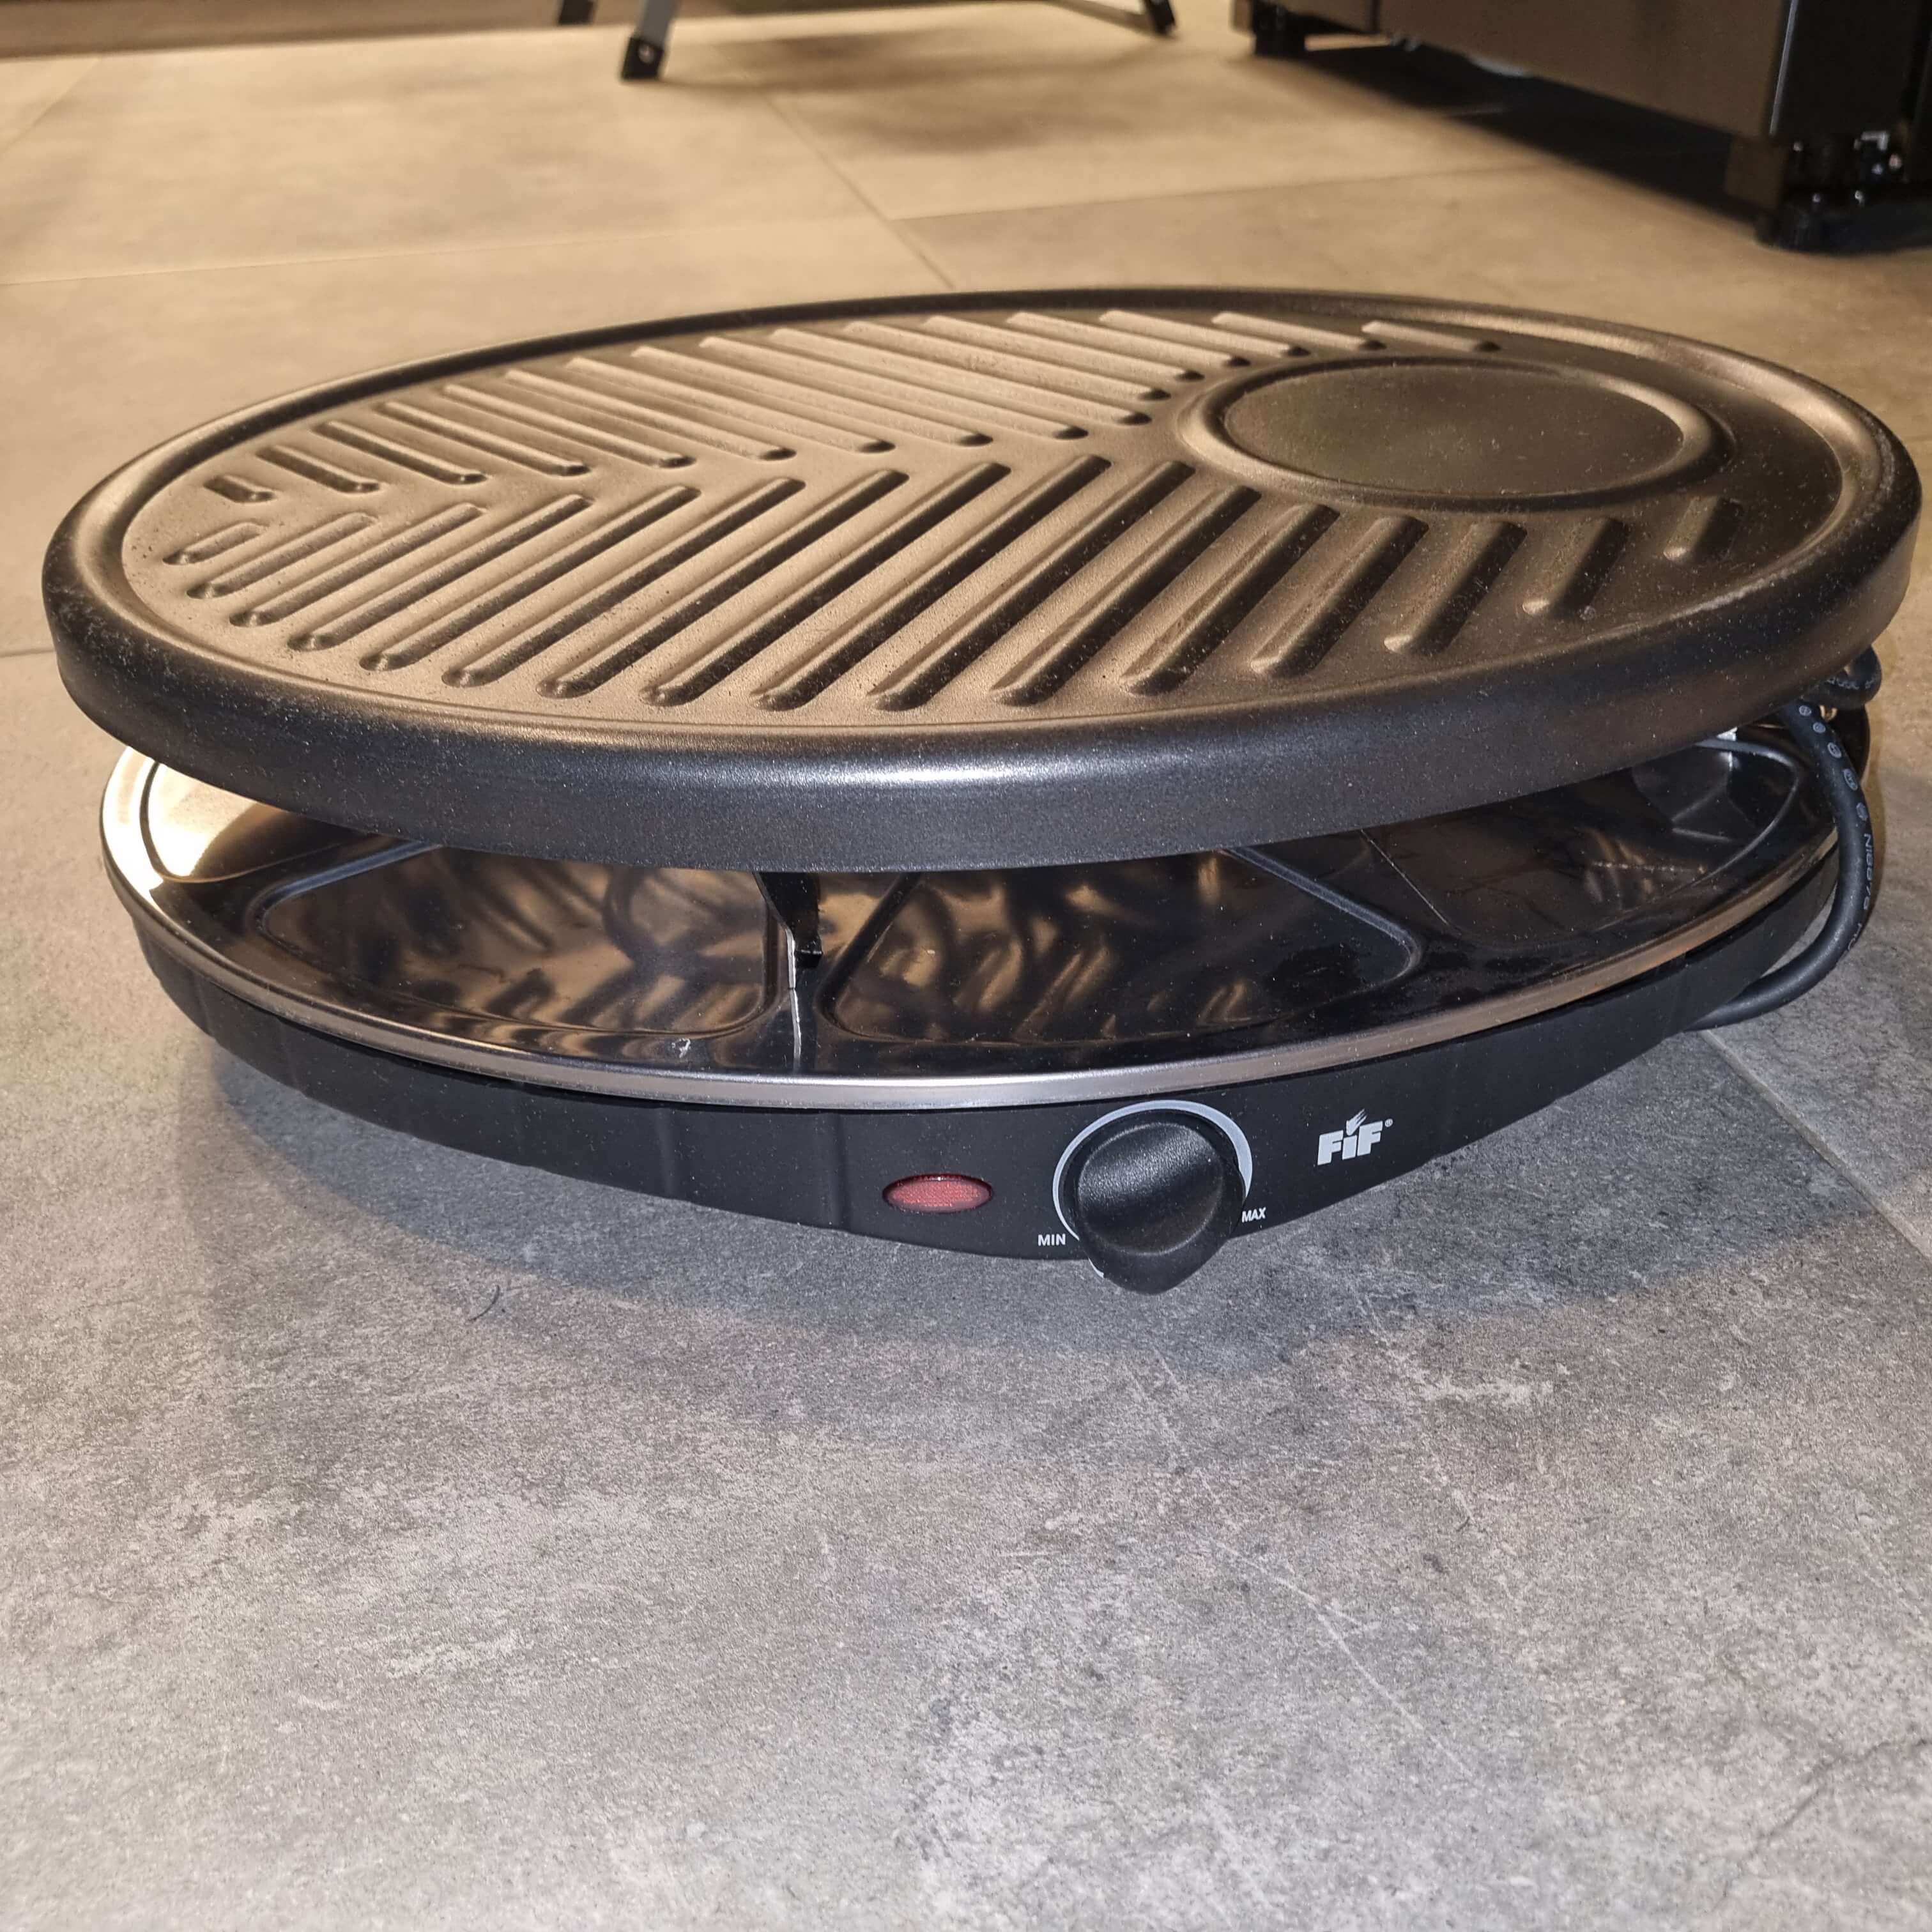 Raclette-Grill - c8efb495-a8be-49d7-8fb3-be18b92a3e43